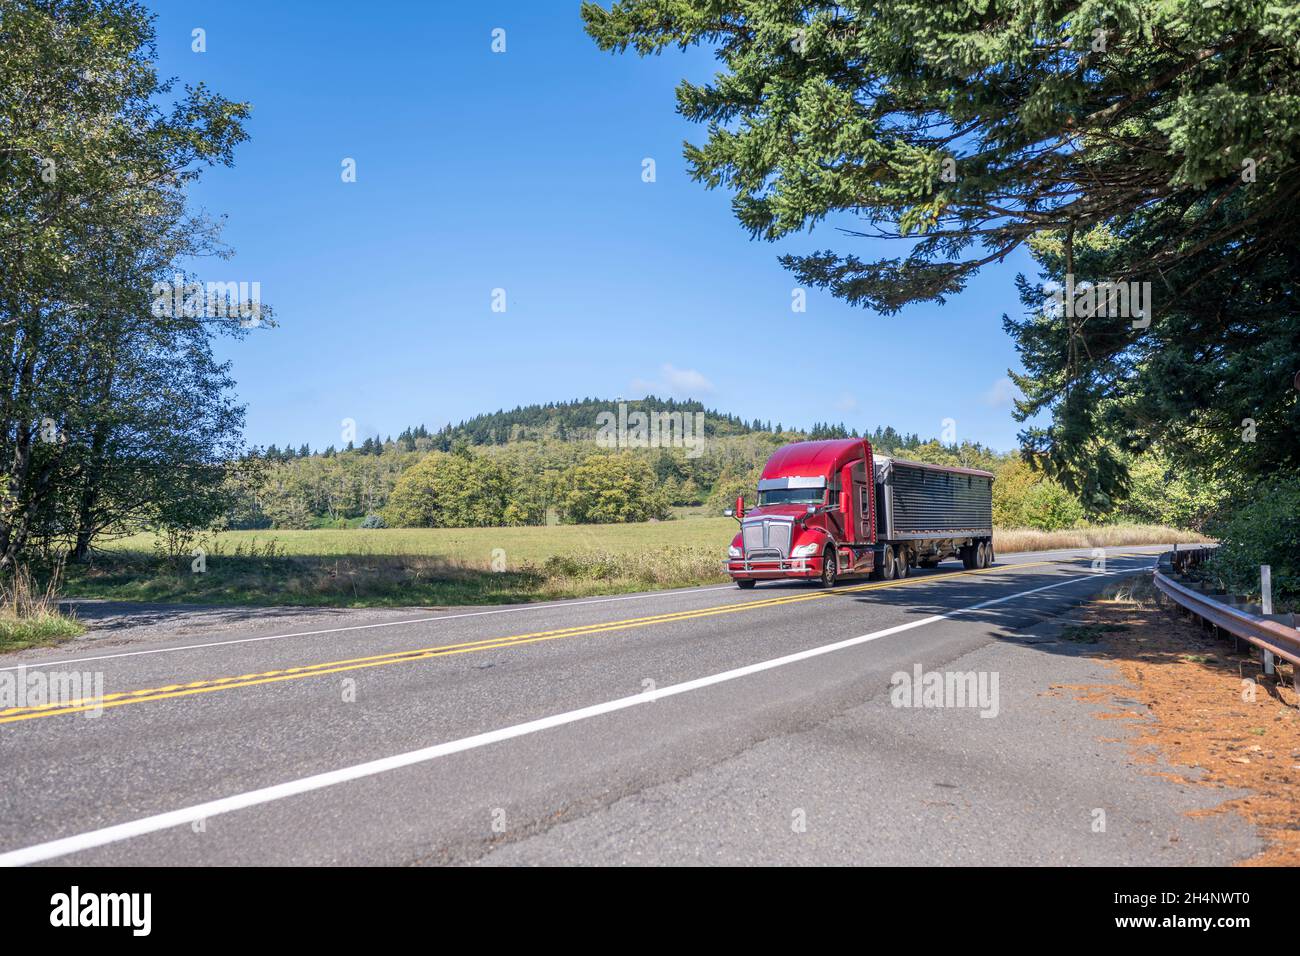 Classic big rig red bonnet semi truck with high cab transporting commercial cargo in covered bulk semi trailer running for delivery on the winding nar Stock Photo